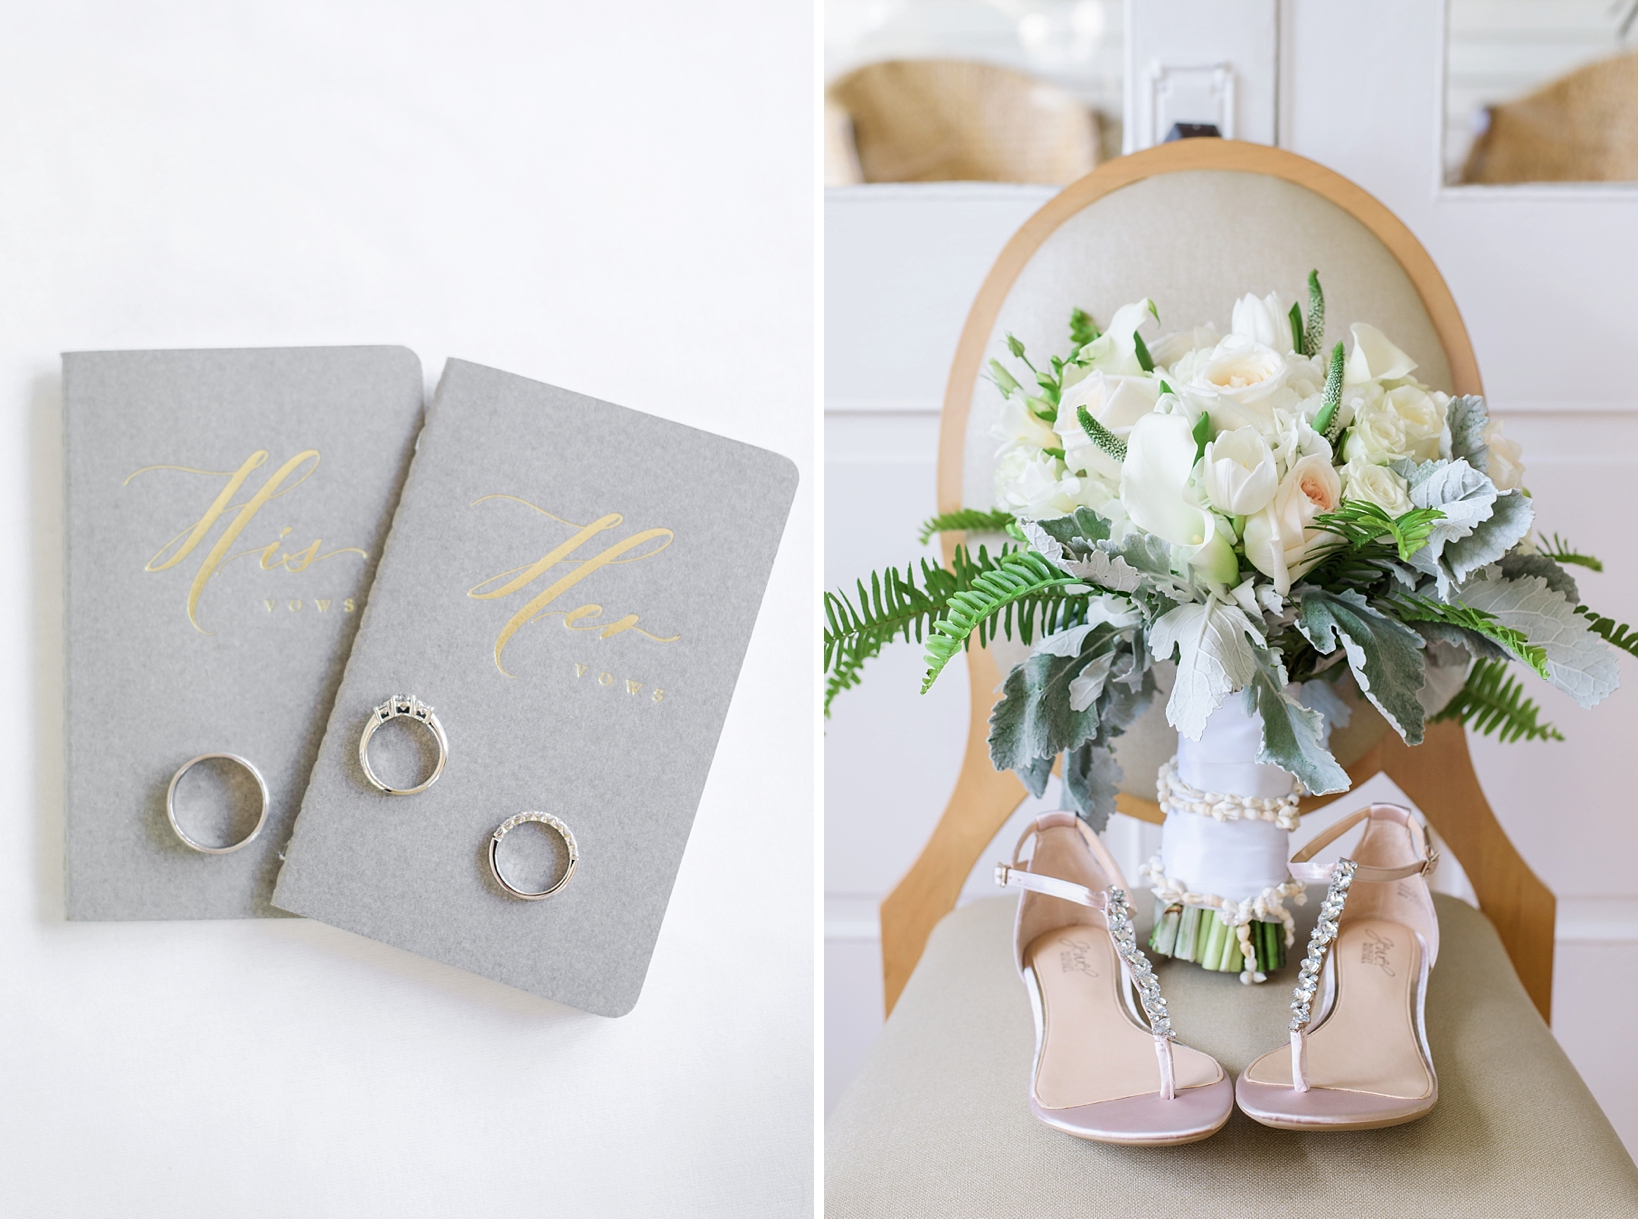 Wedding vows and wedding rings together with bride's bouquet and shoes